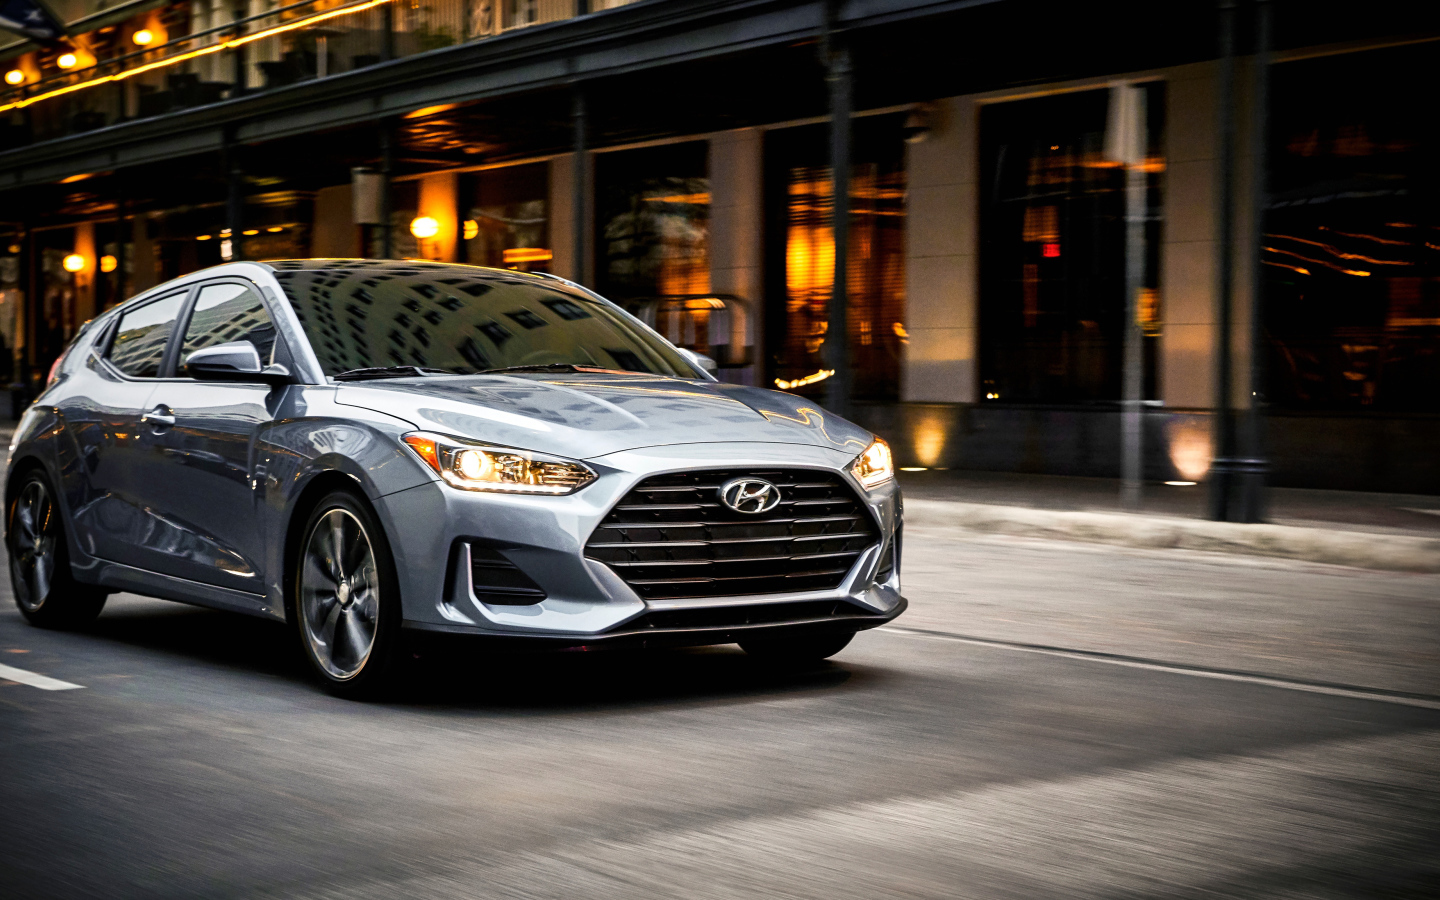 Silver car Hyundai Veloster, 2019 with headlights on